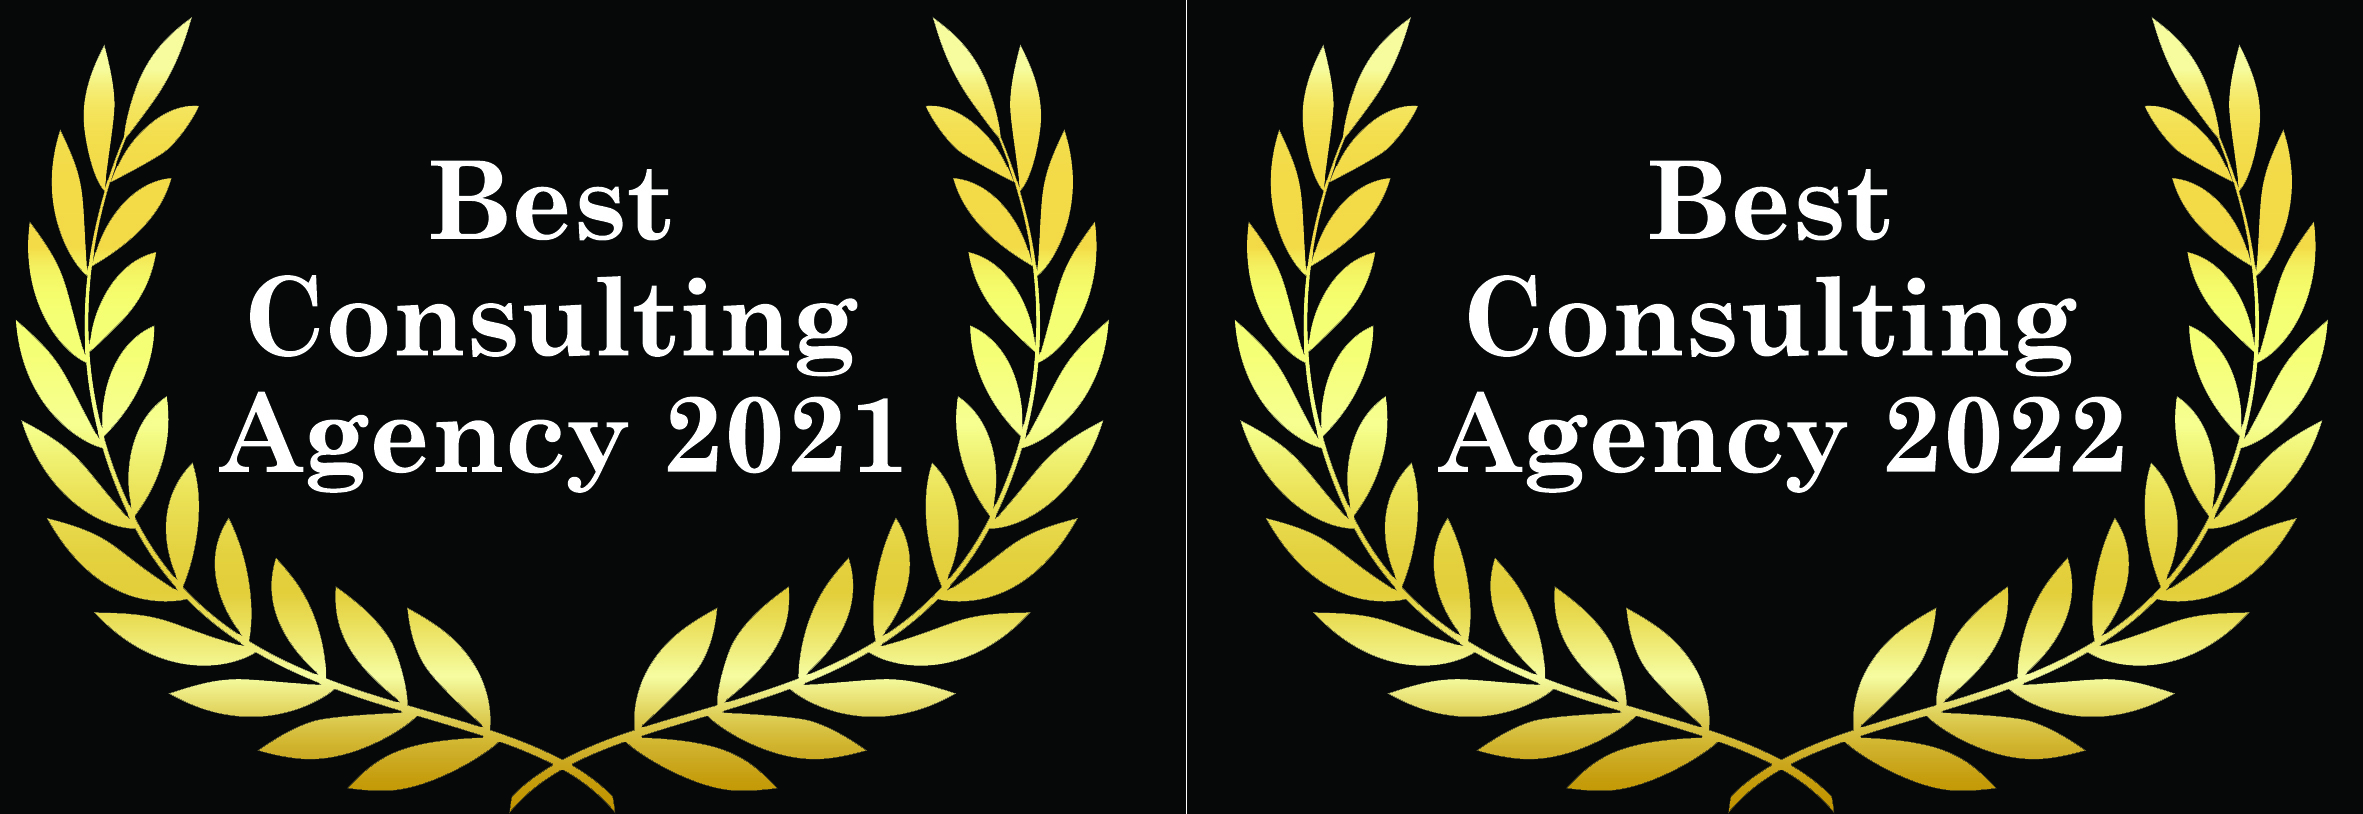 Best consulting agency 2021